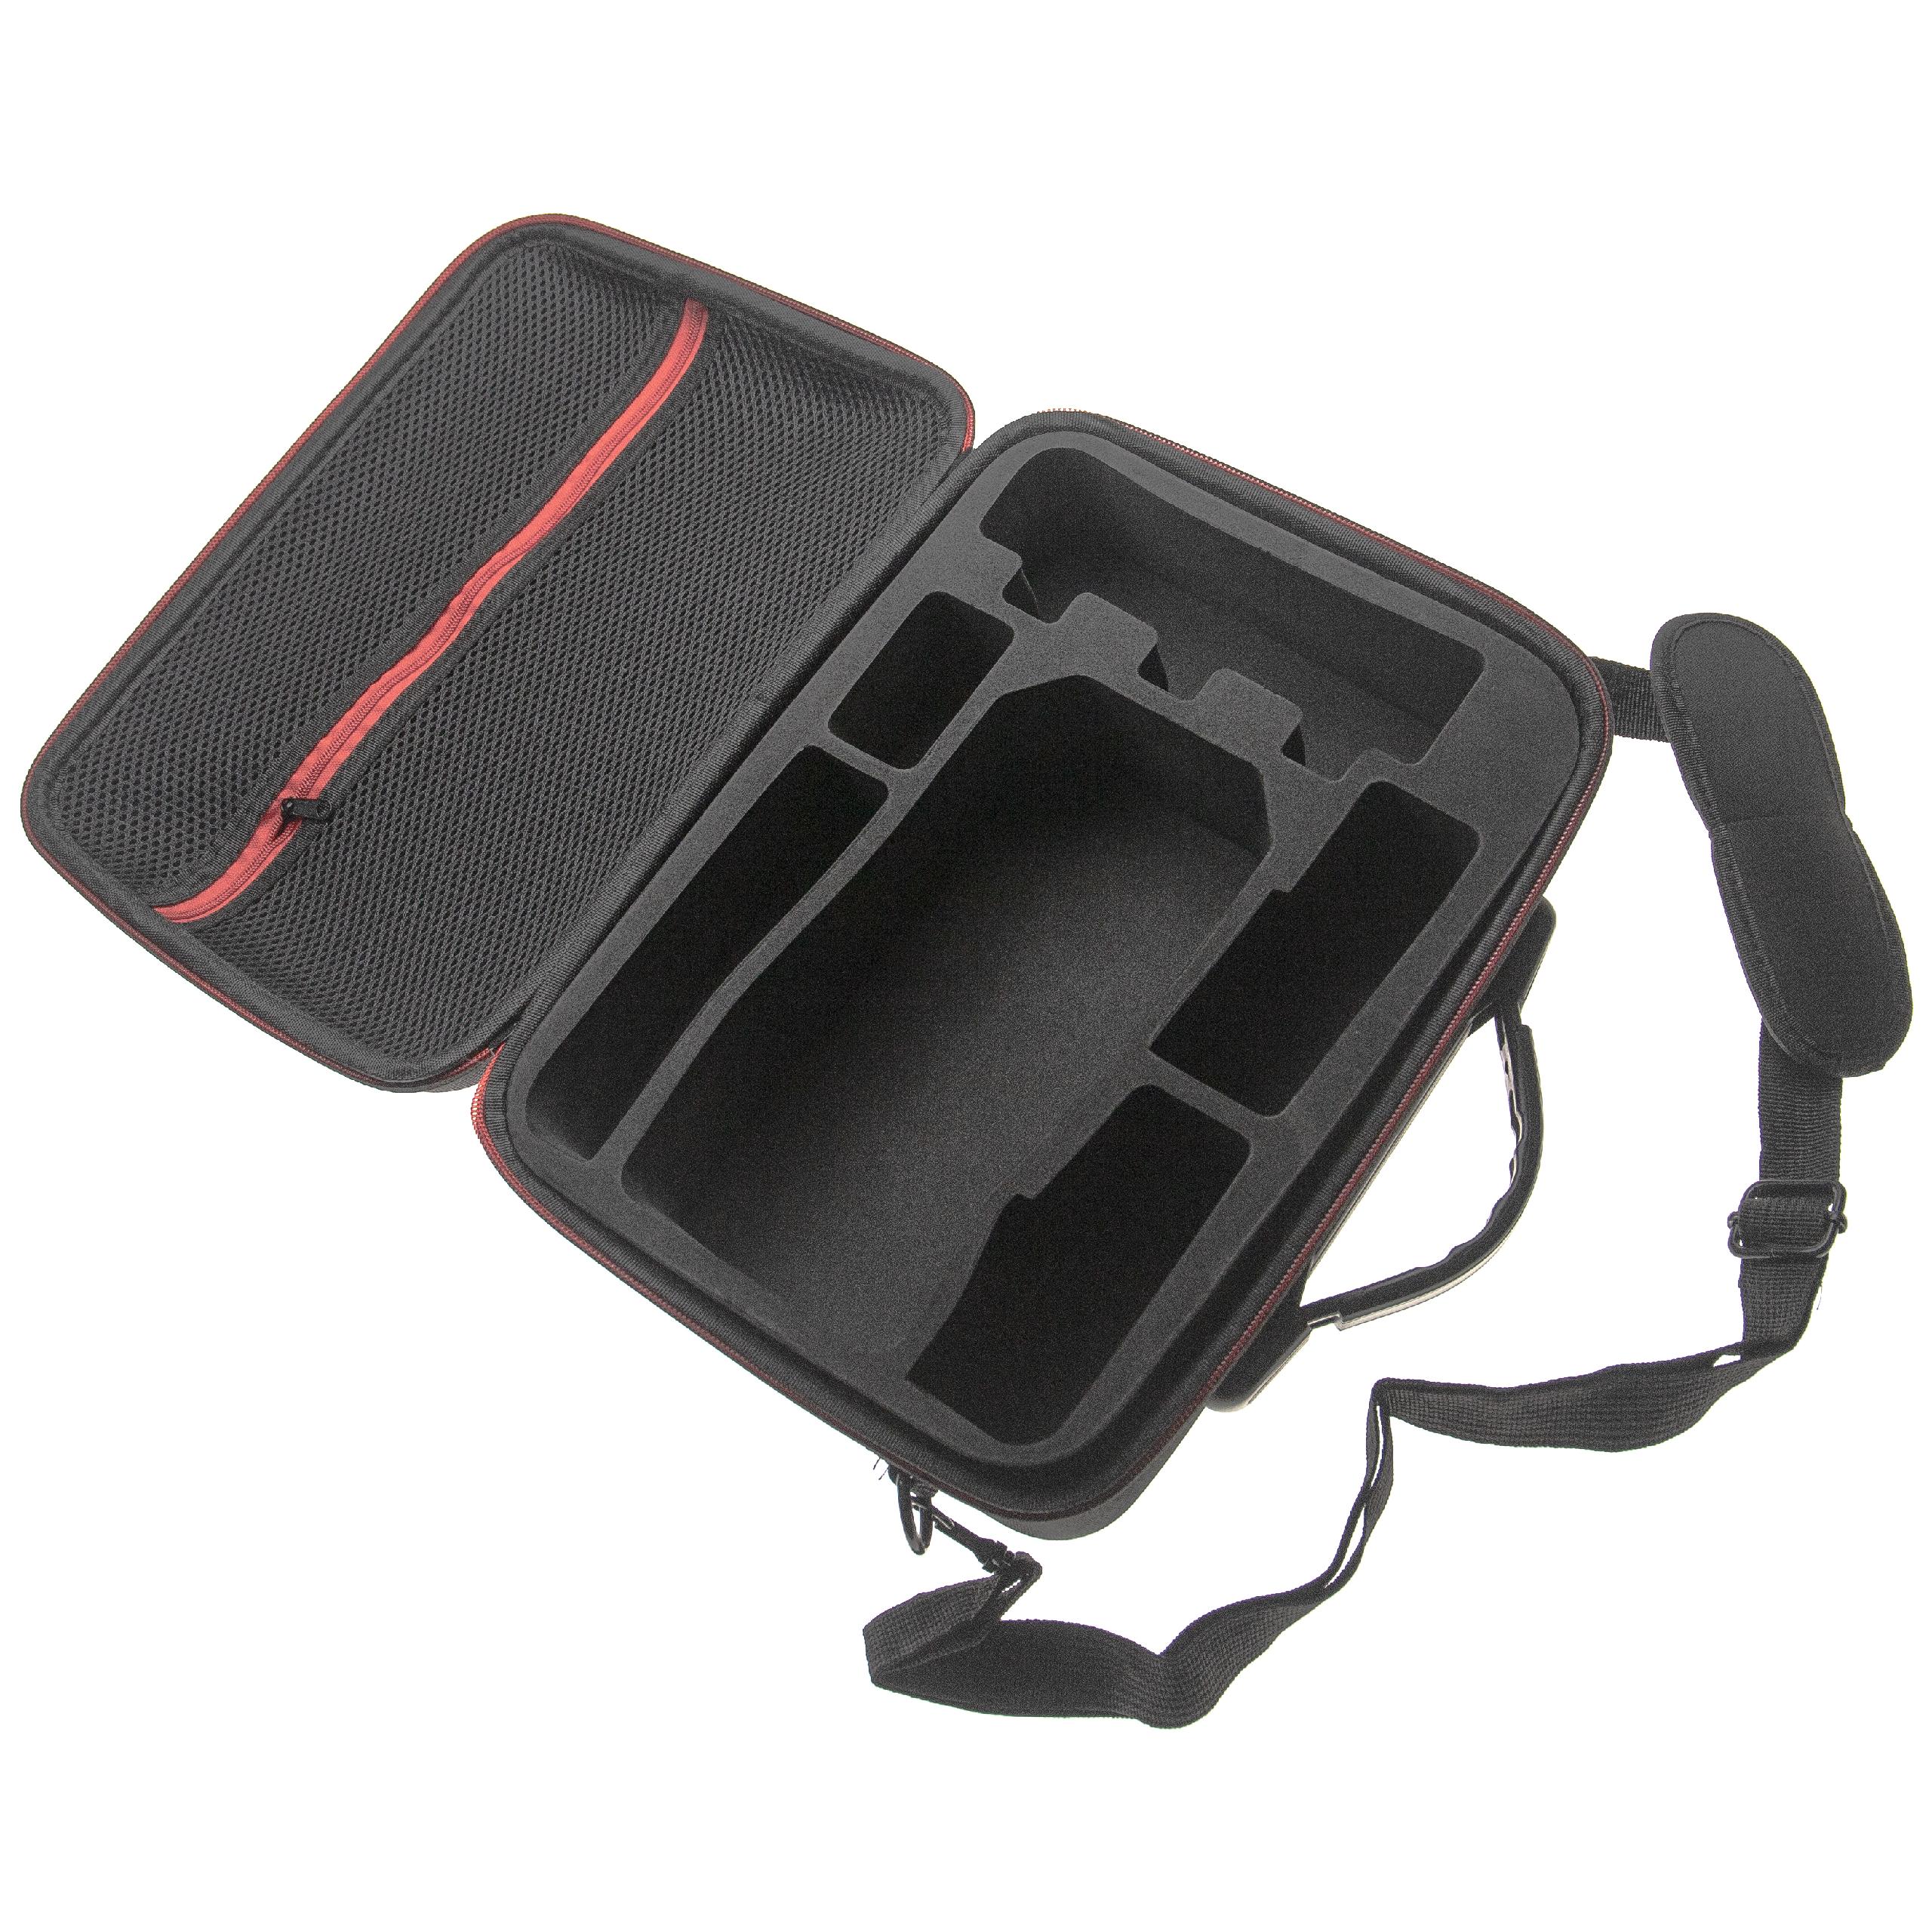 vhbw Carrying Case Drone incl. Accessories - Hard Carry Case, Protective Storage Organiser, with Detachable St